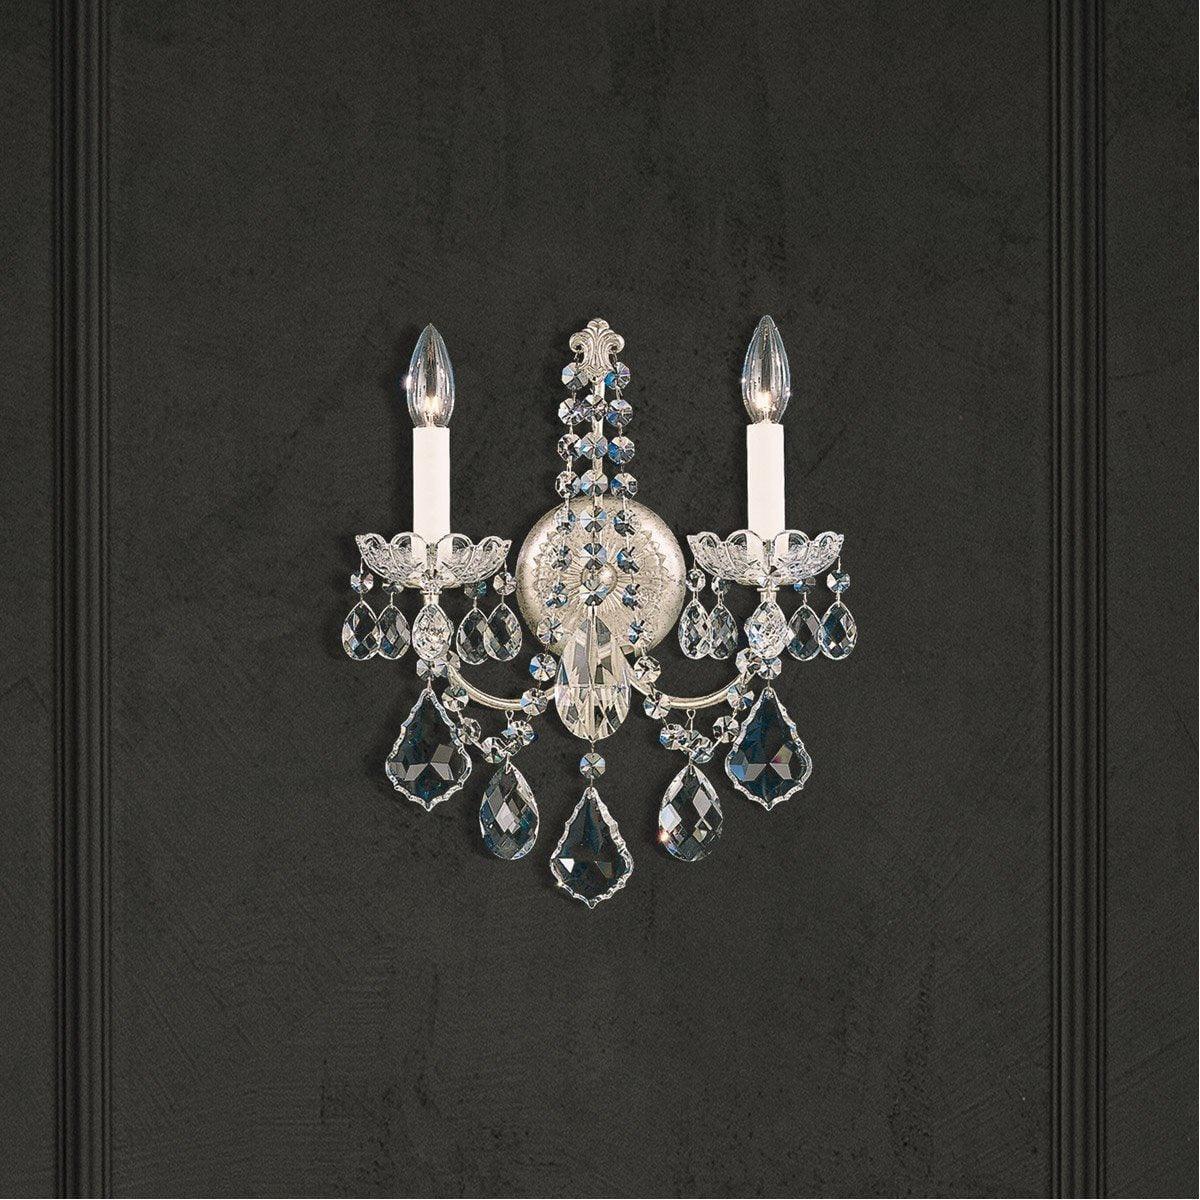 Schonbek 1870 - New Orleans Wall Sconce - 3651-48S | Montreal Lighting & Hardware